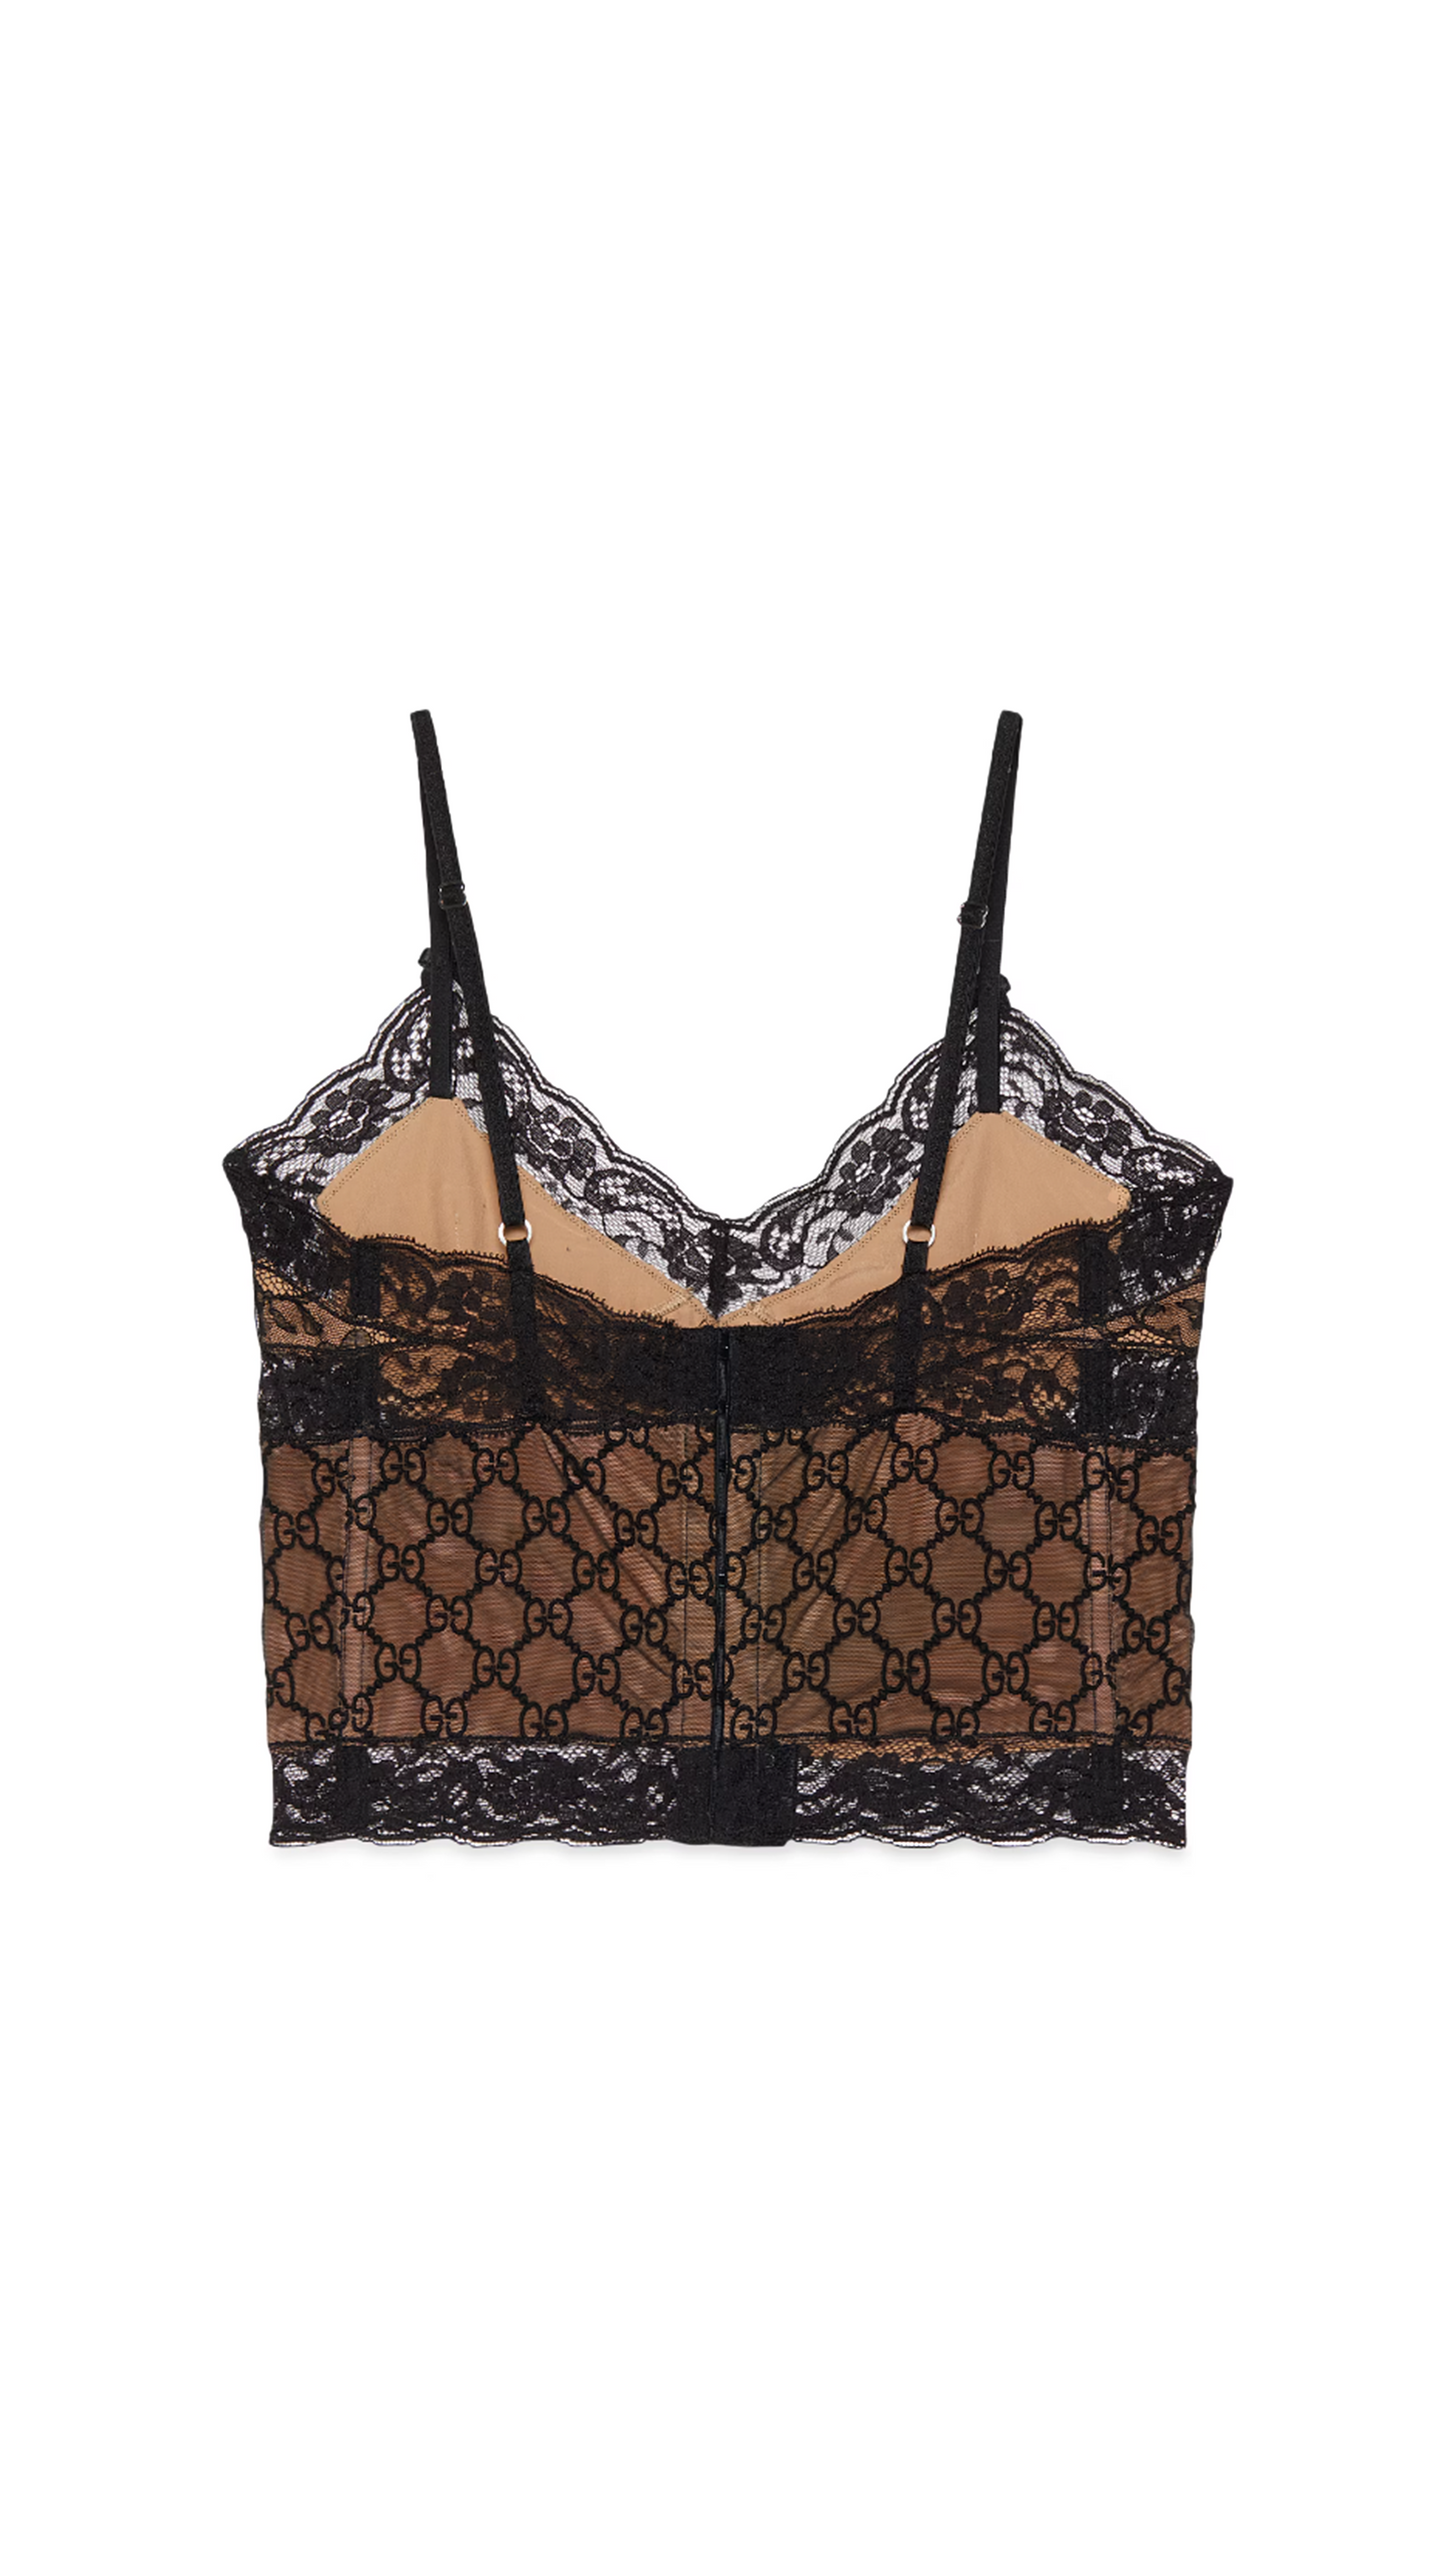 GG Lace Top - Black